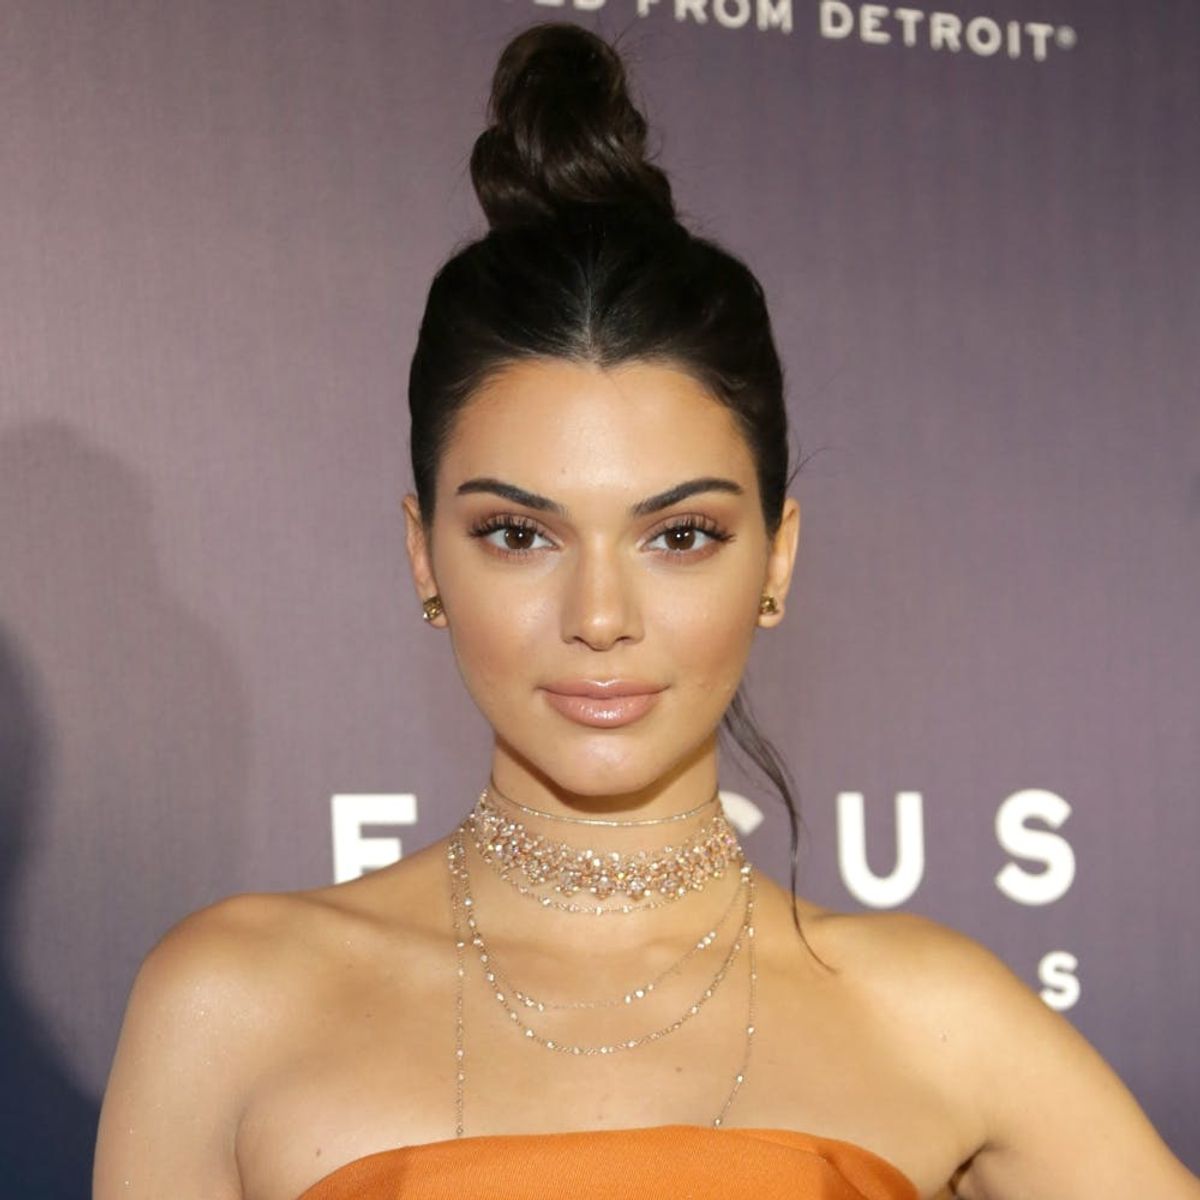 Kendall Jenner’s Robbery Was Reportedly an Inside Job and Her Friends Are Under Suspicion